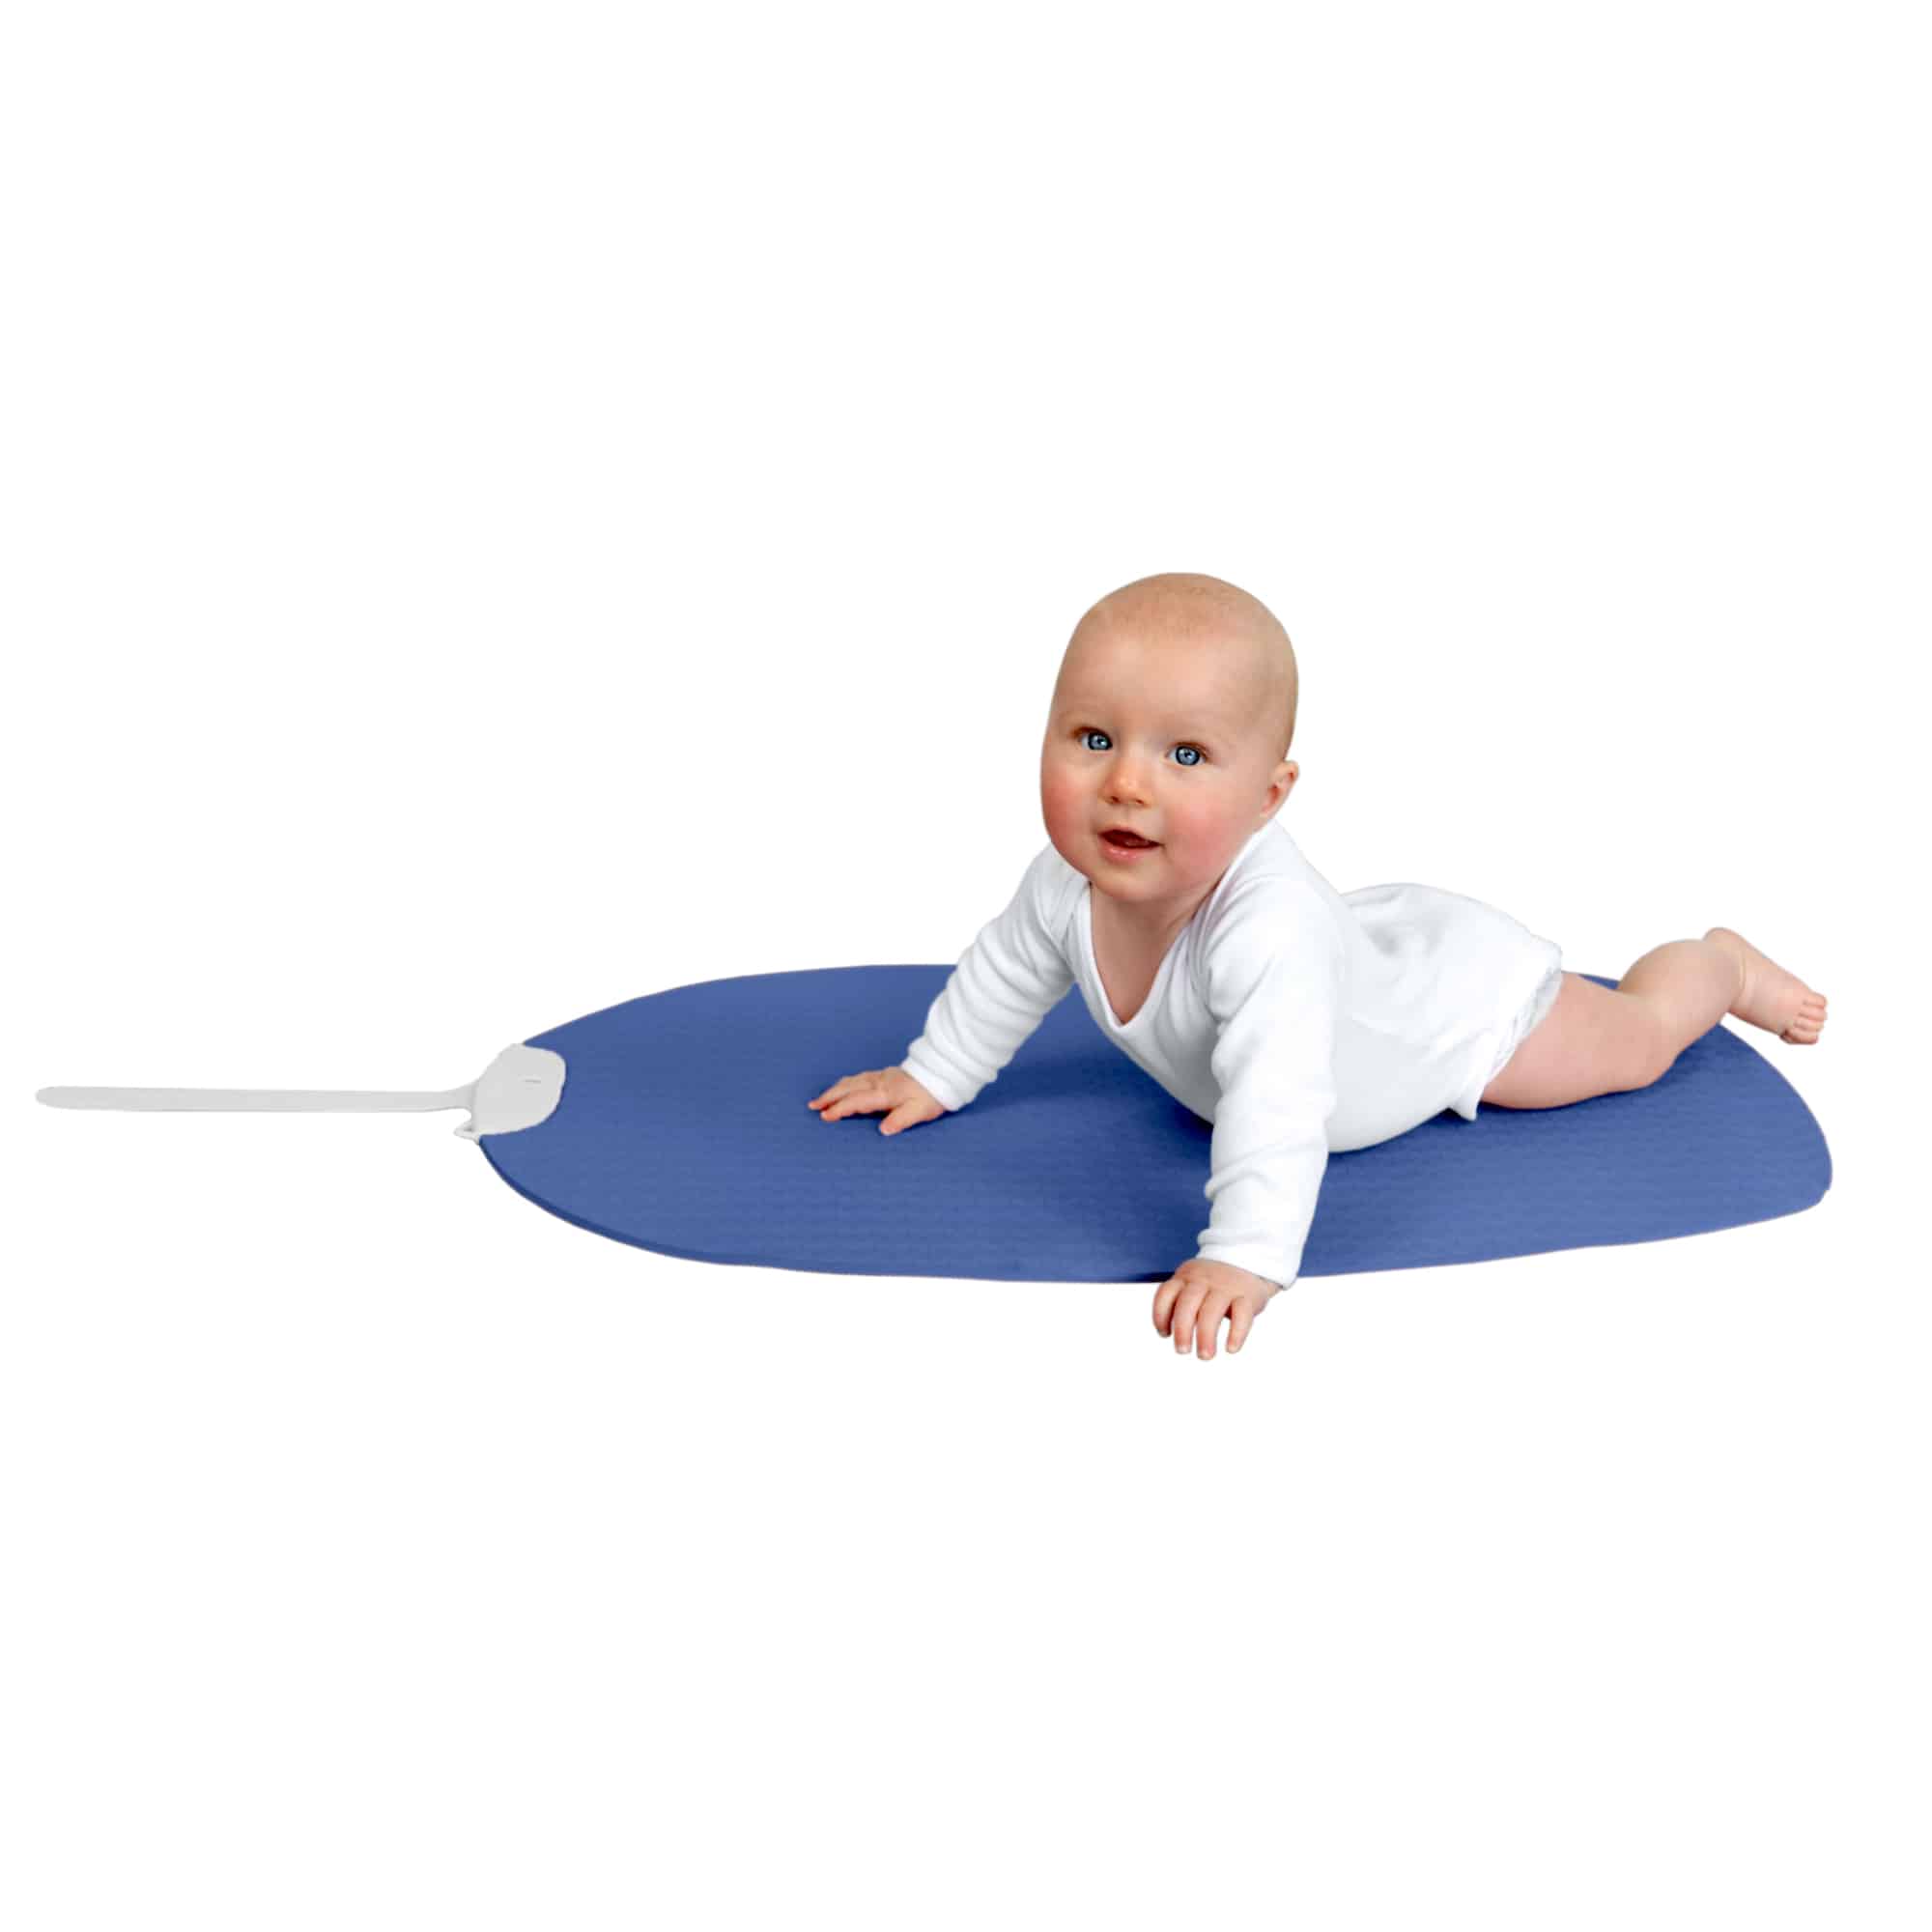 Little Girl Tummy Time on Baby Yoga Play Mat Blue